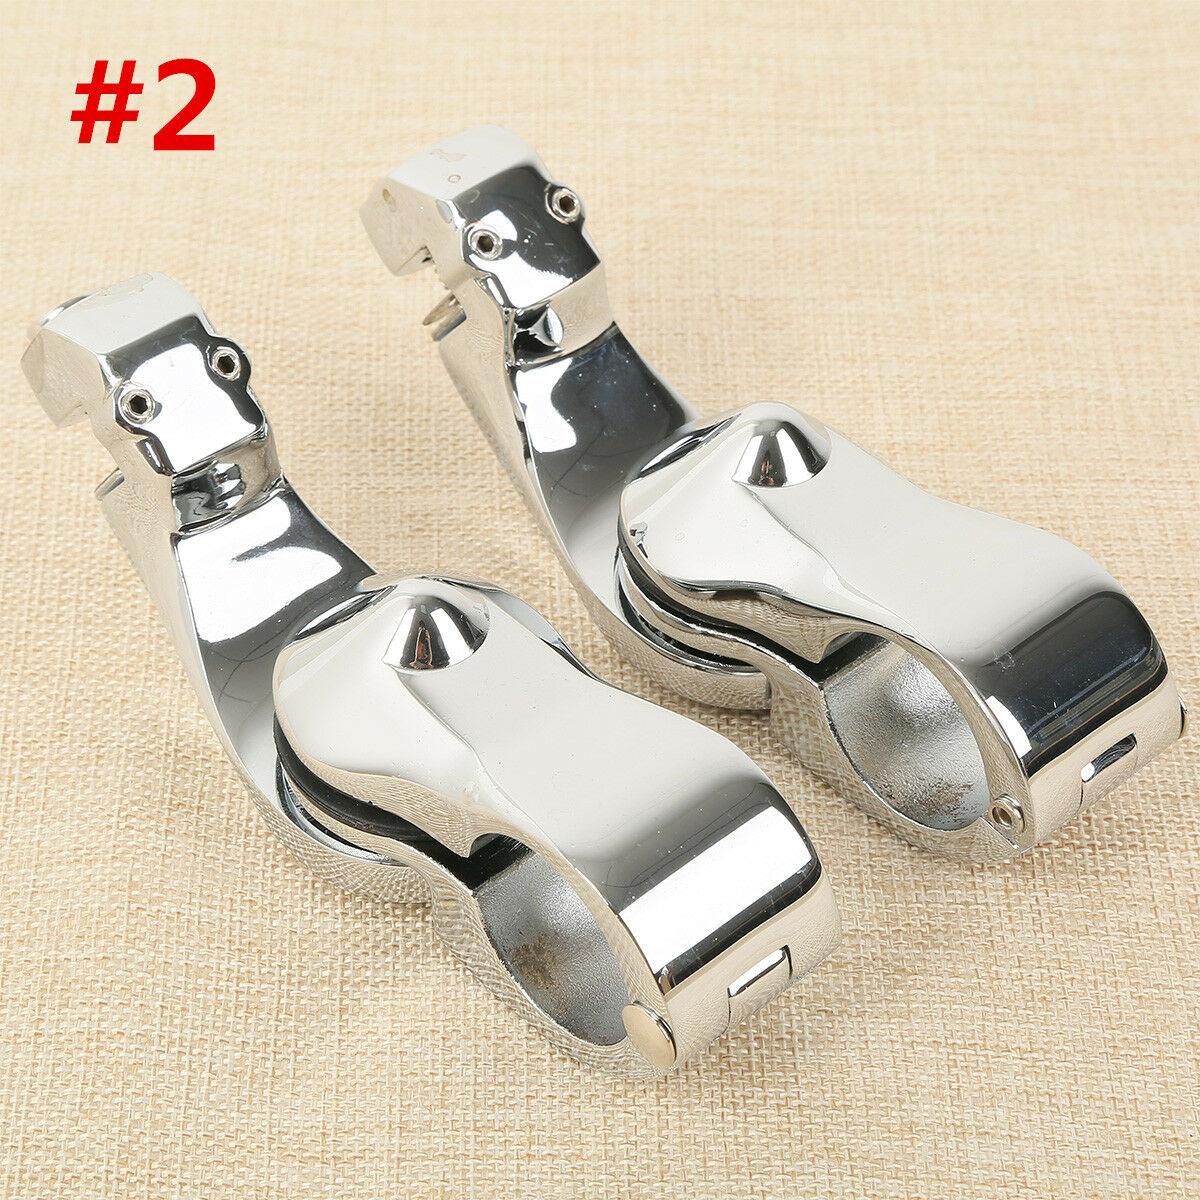 1-1/4" Chrome Highway Short Angled Pegstreamliner Bar Foot Pegs Fit For Harley - Moto Life Products